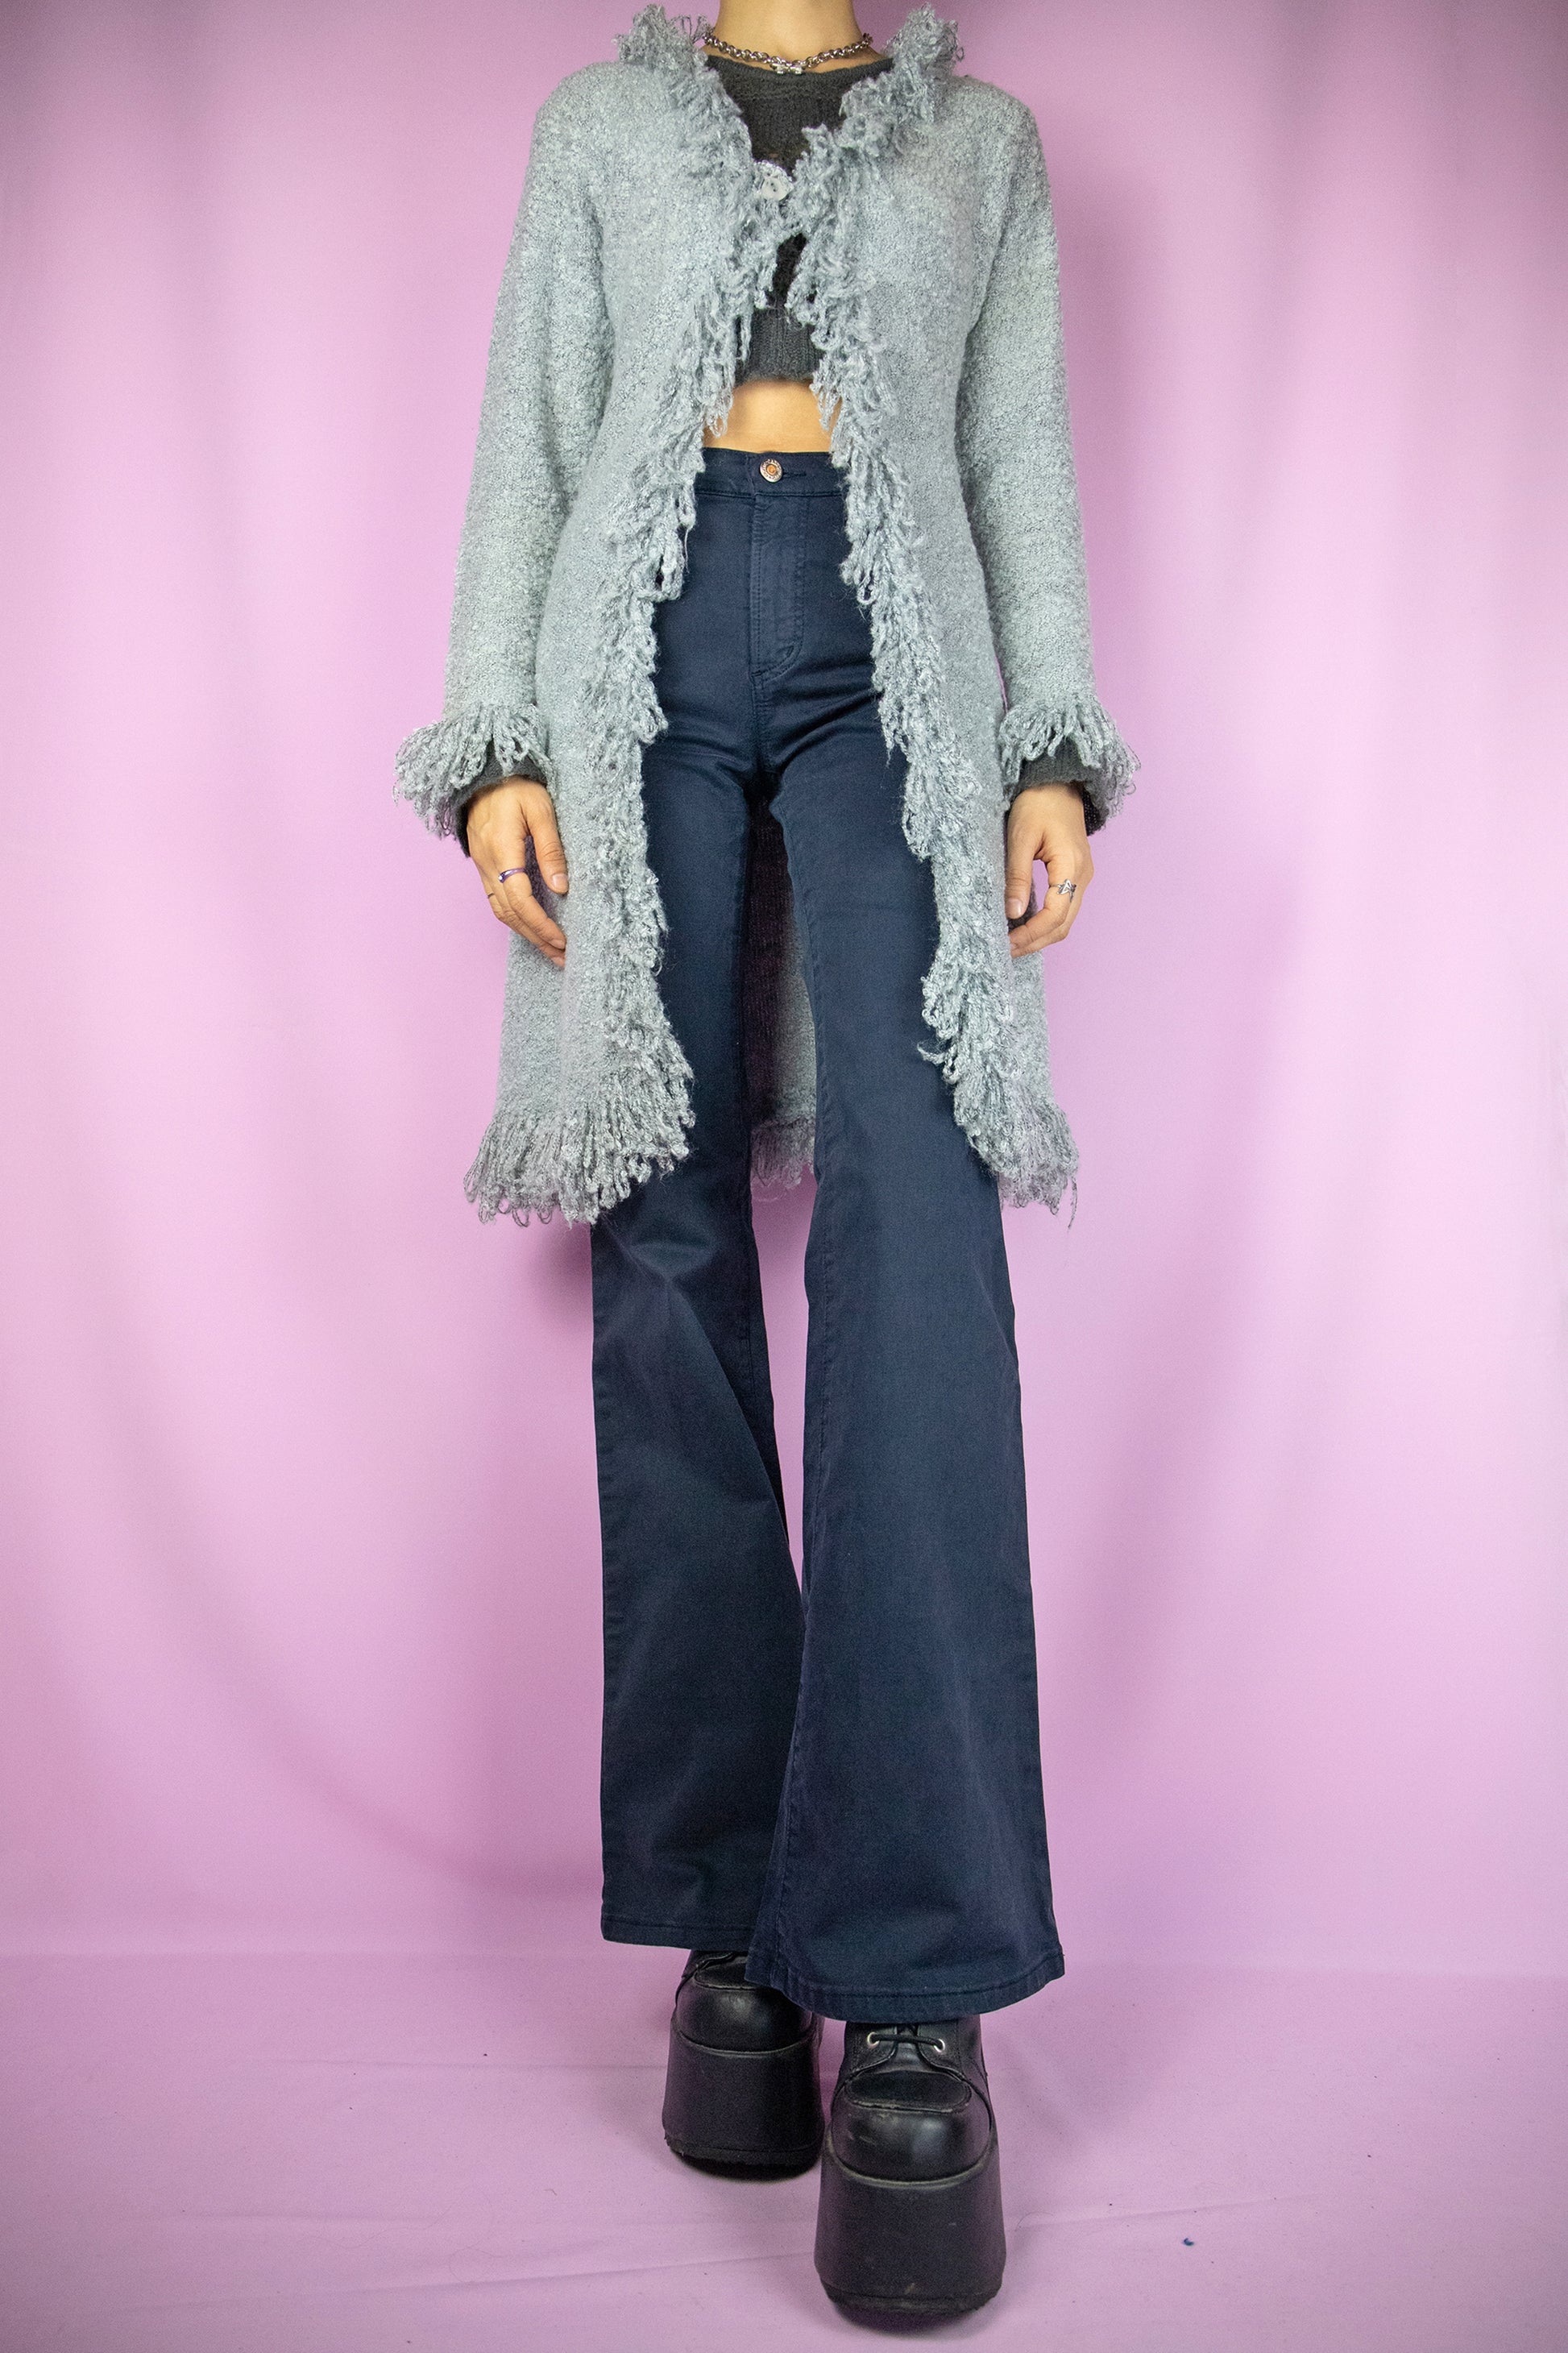 The Y2K Gray Penny Lane Cardigan is a vintage long shaggy knit cardigan with a one button closure and fringe trim at the neckline and cuffs. Cyber fairy grunge 2000s boho duster jacket.